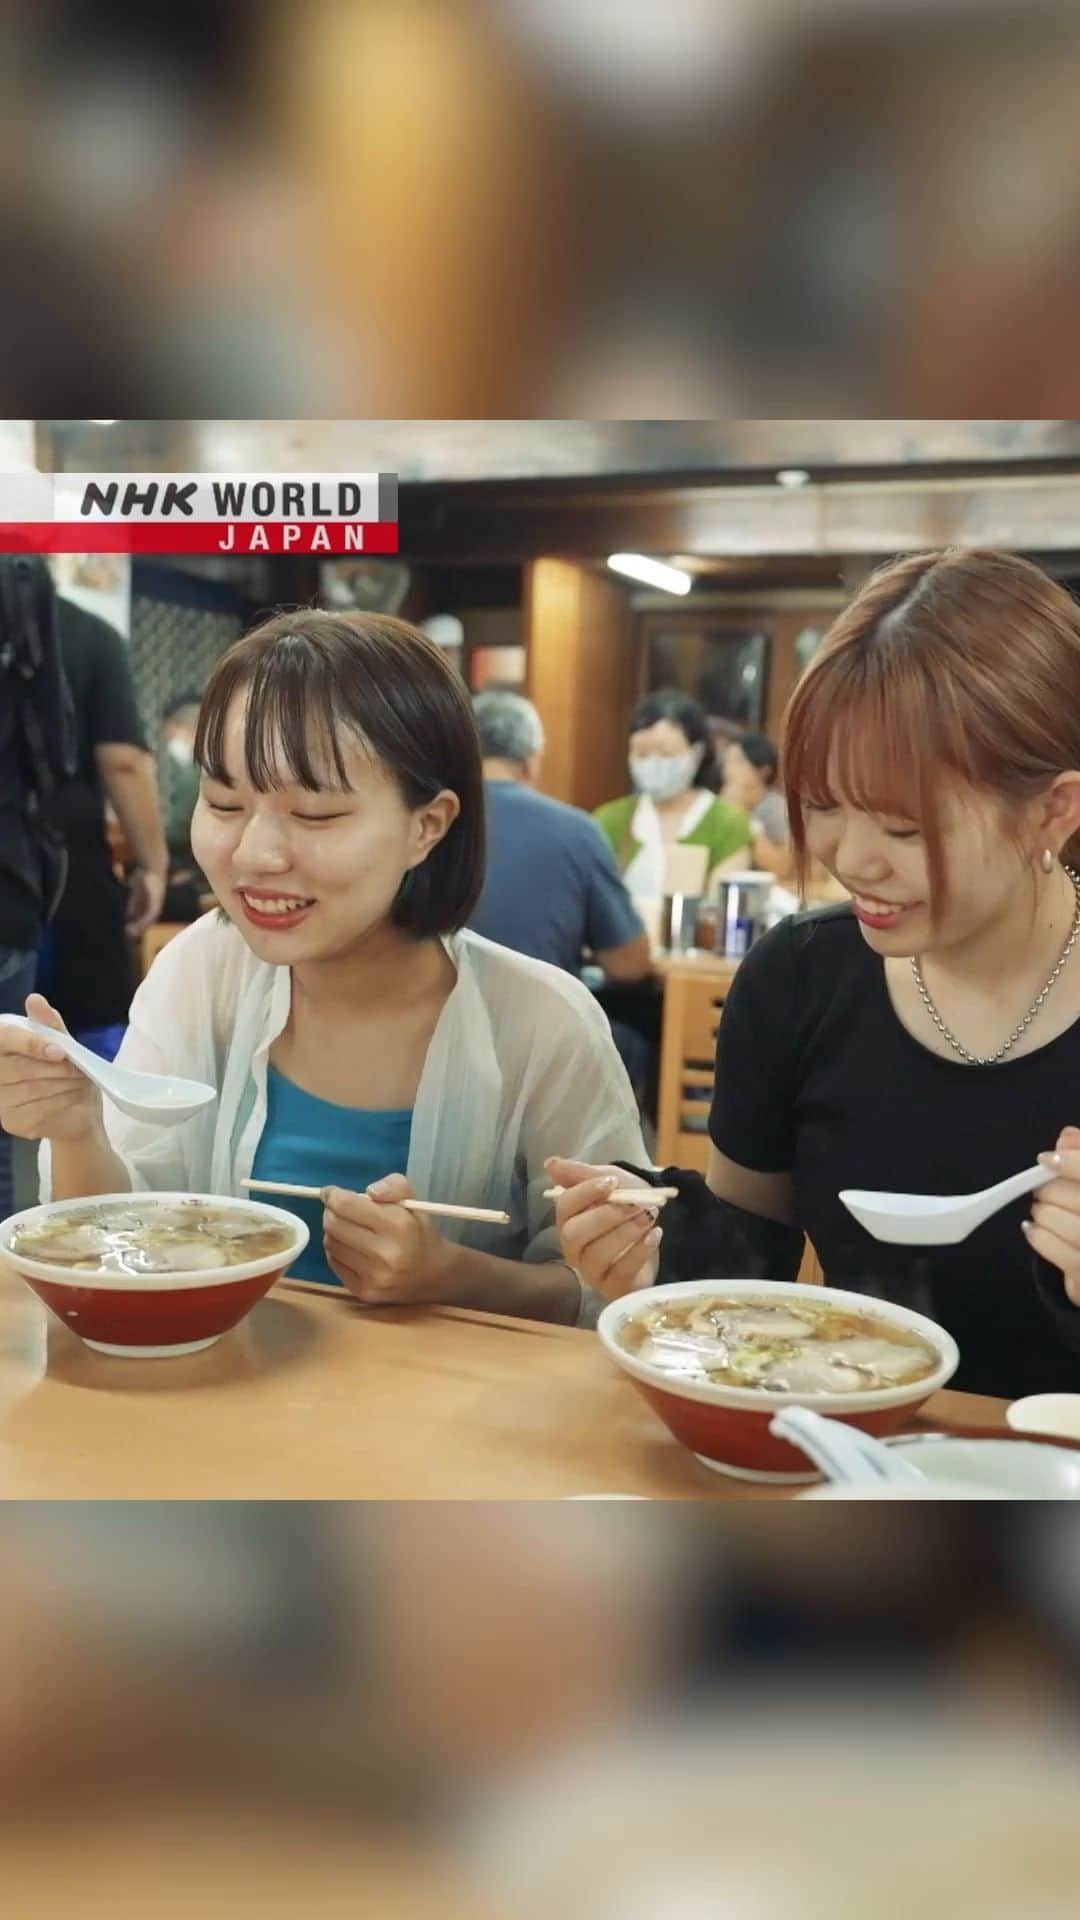 NHK「WORLD-JAPAN」のインスタグラム：「People come from across Japan to eat Kitakata ramen.😋 It features thick, curly, springy, noodles which help hold onto the delicious soup.🍜  One noodle manufacturer supplies more than half of the city’s ramen shops. In addition to the curling done by machines, they also hand knead each noodle ball. This adds an extra curliness and creates irregularities impossible to get with a machine.➿  Have you eaten Kitakata ramen? . 👉Discover why people line up each morning for this curly ramen｜Watch｜RAMEN JAPAN: FUKUSHIMA｜Free On Demand｜NHK WORLD-JAPAN website.👀 . 👉Tap in Stories/Highlights to get there.👆 . 👉See the link in our bio for more on the latest from Japan. . 👉If we’re on your Favorites list you won’t miss a post. . . #kitakataramen #ramennoodles #curlyramen #curlynoodles #ramensoup #soupstock #slurpingramen #ラーメン #拉麺 #ramen #ramenlover #morningramen #japanesefood #ramennoodles #noodles #japaneseramen #喜多方ラーメン #visitjapan #kitakata #discoverjapan #hiddenjapan #nhkworldjapan #japan」